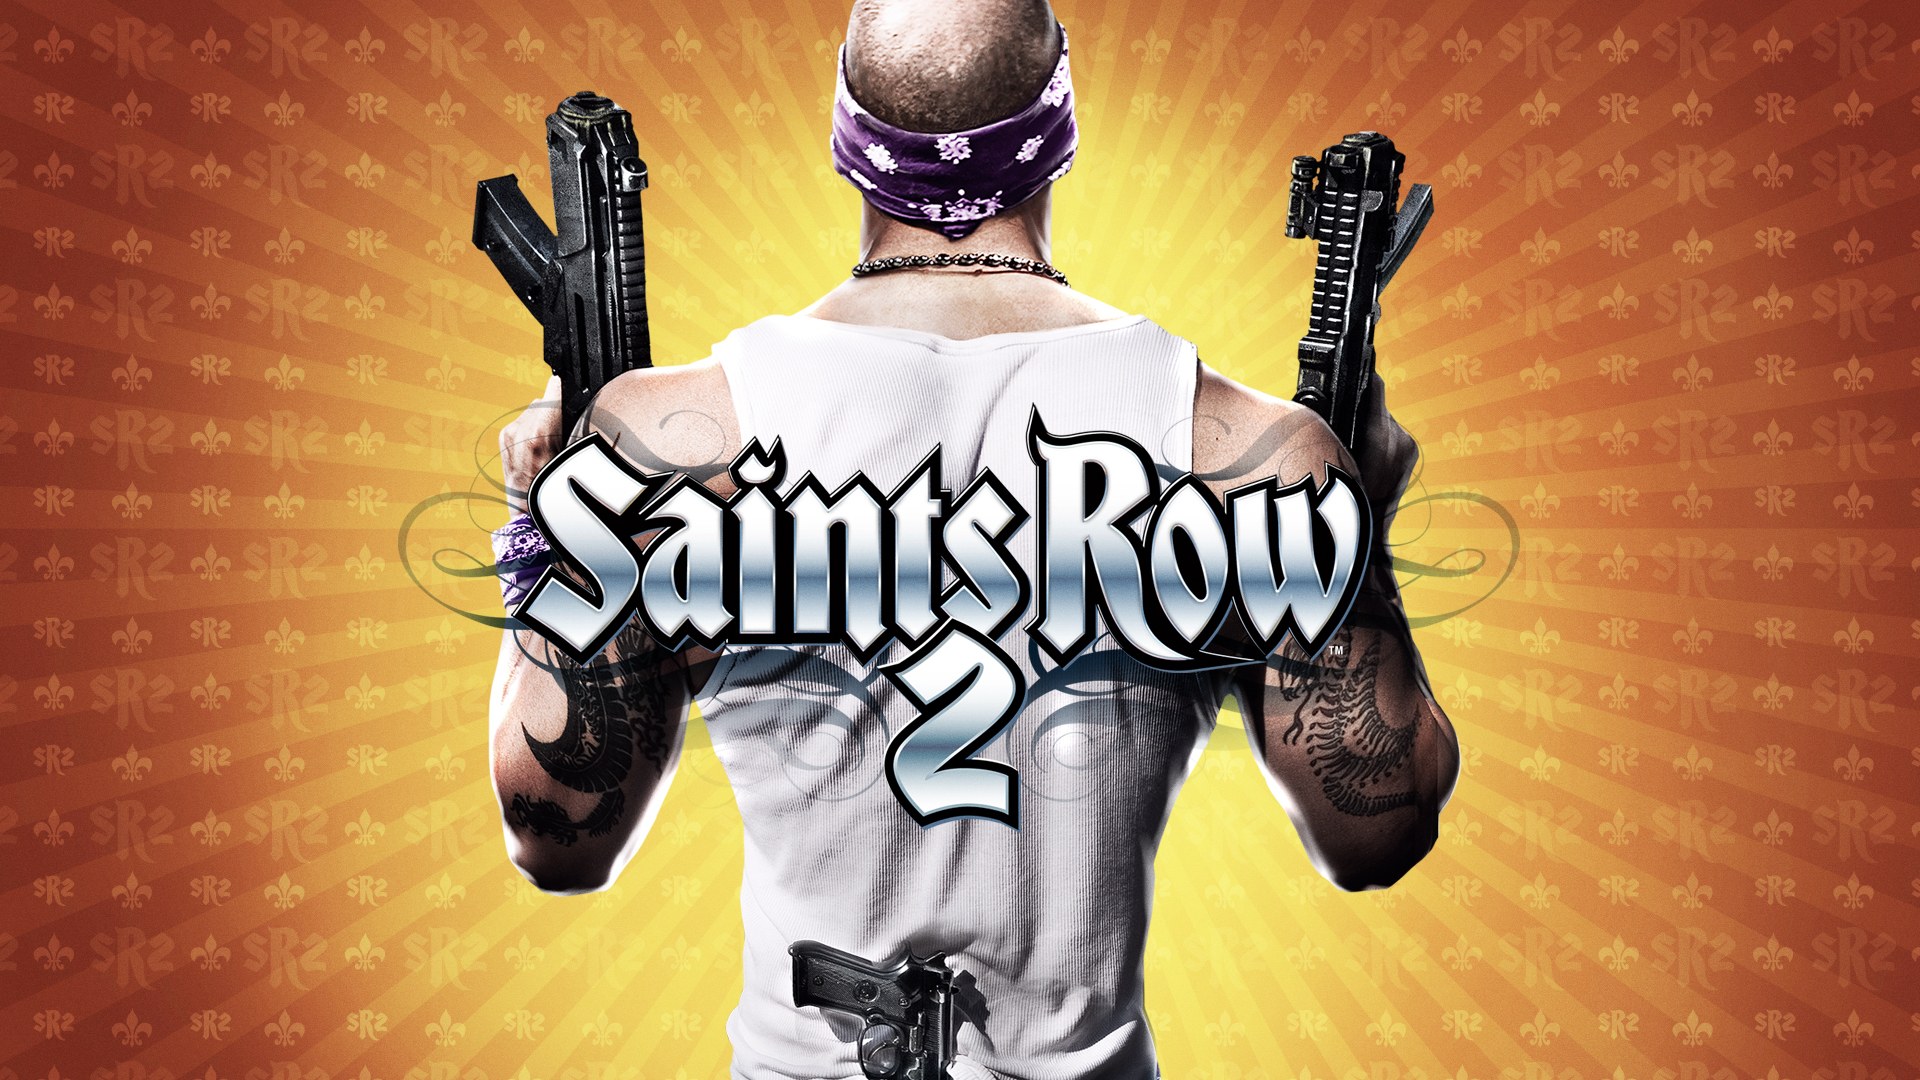 Video Game Saints Row 2 HD Wallpaper | Background Image